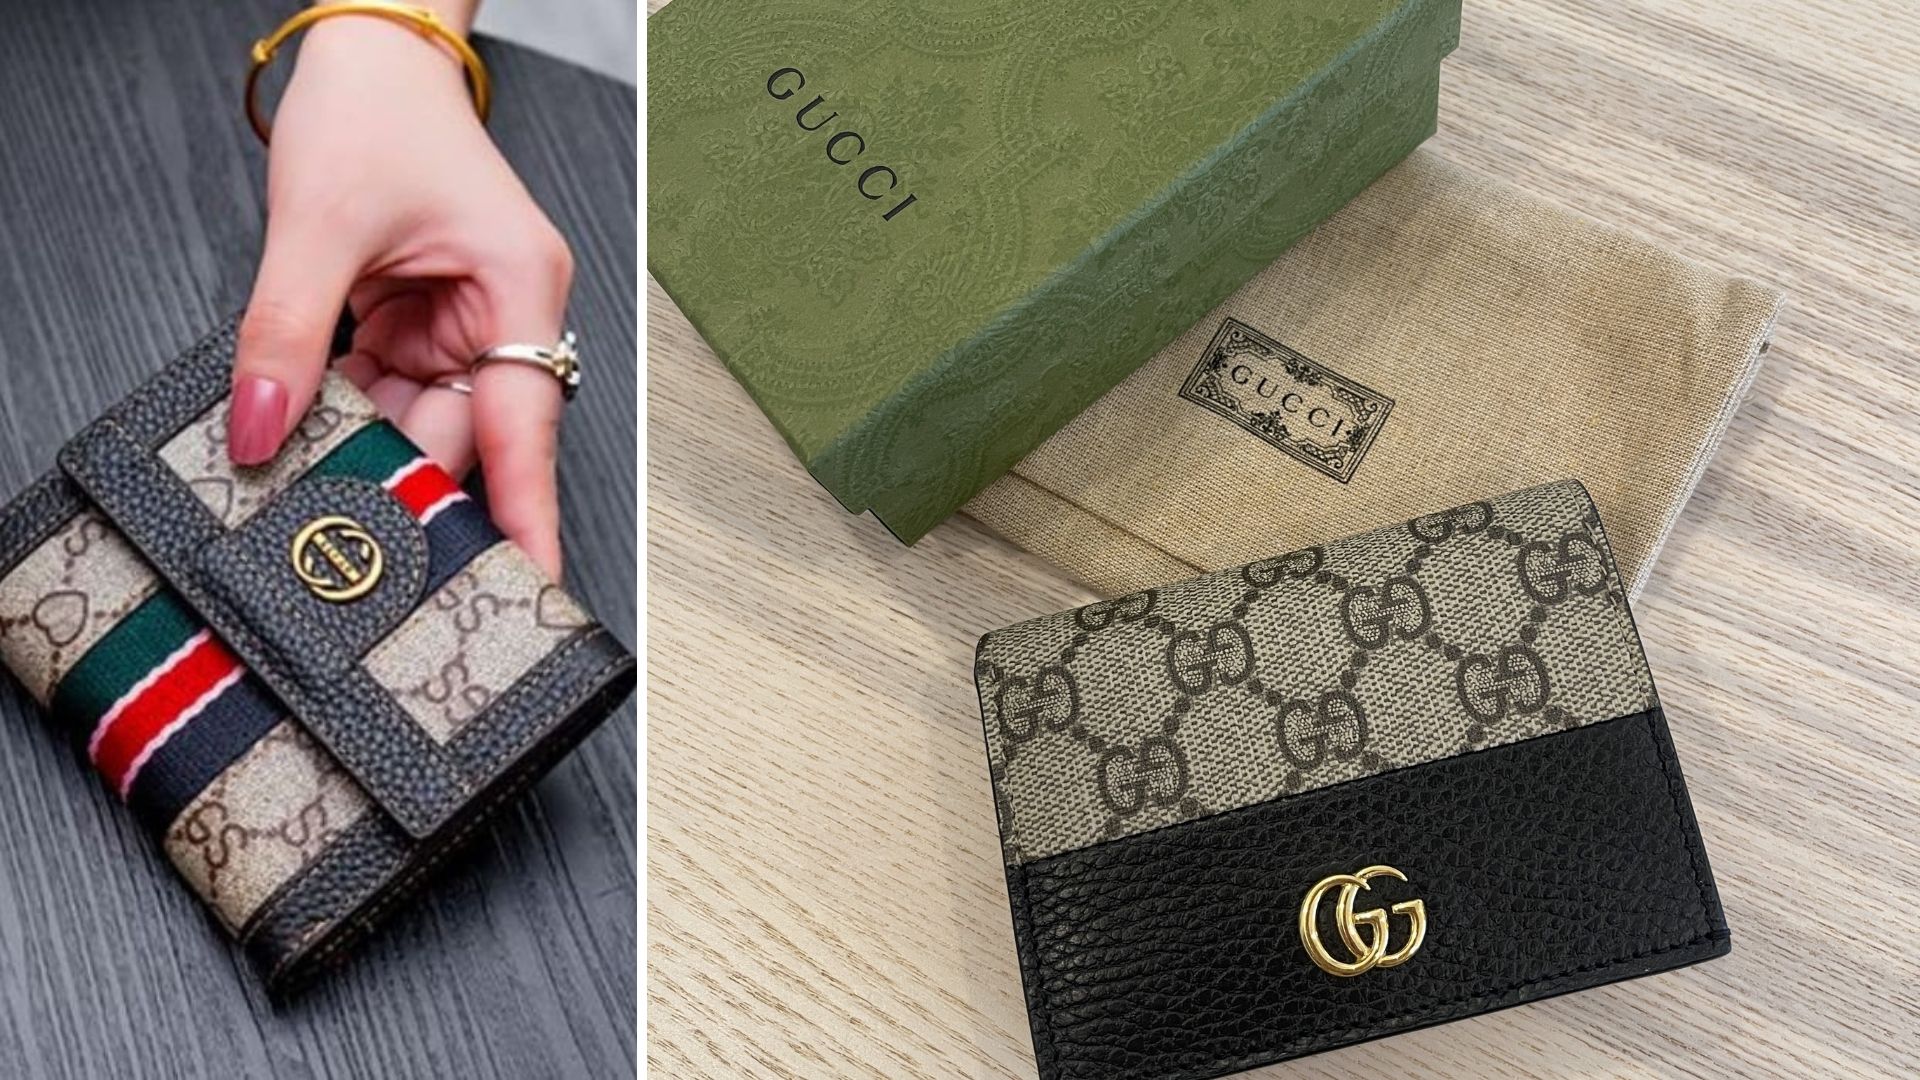 Images showing Gucci wallet.